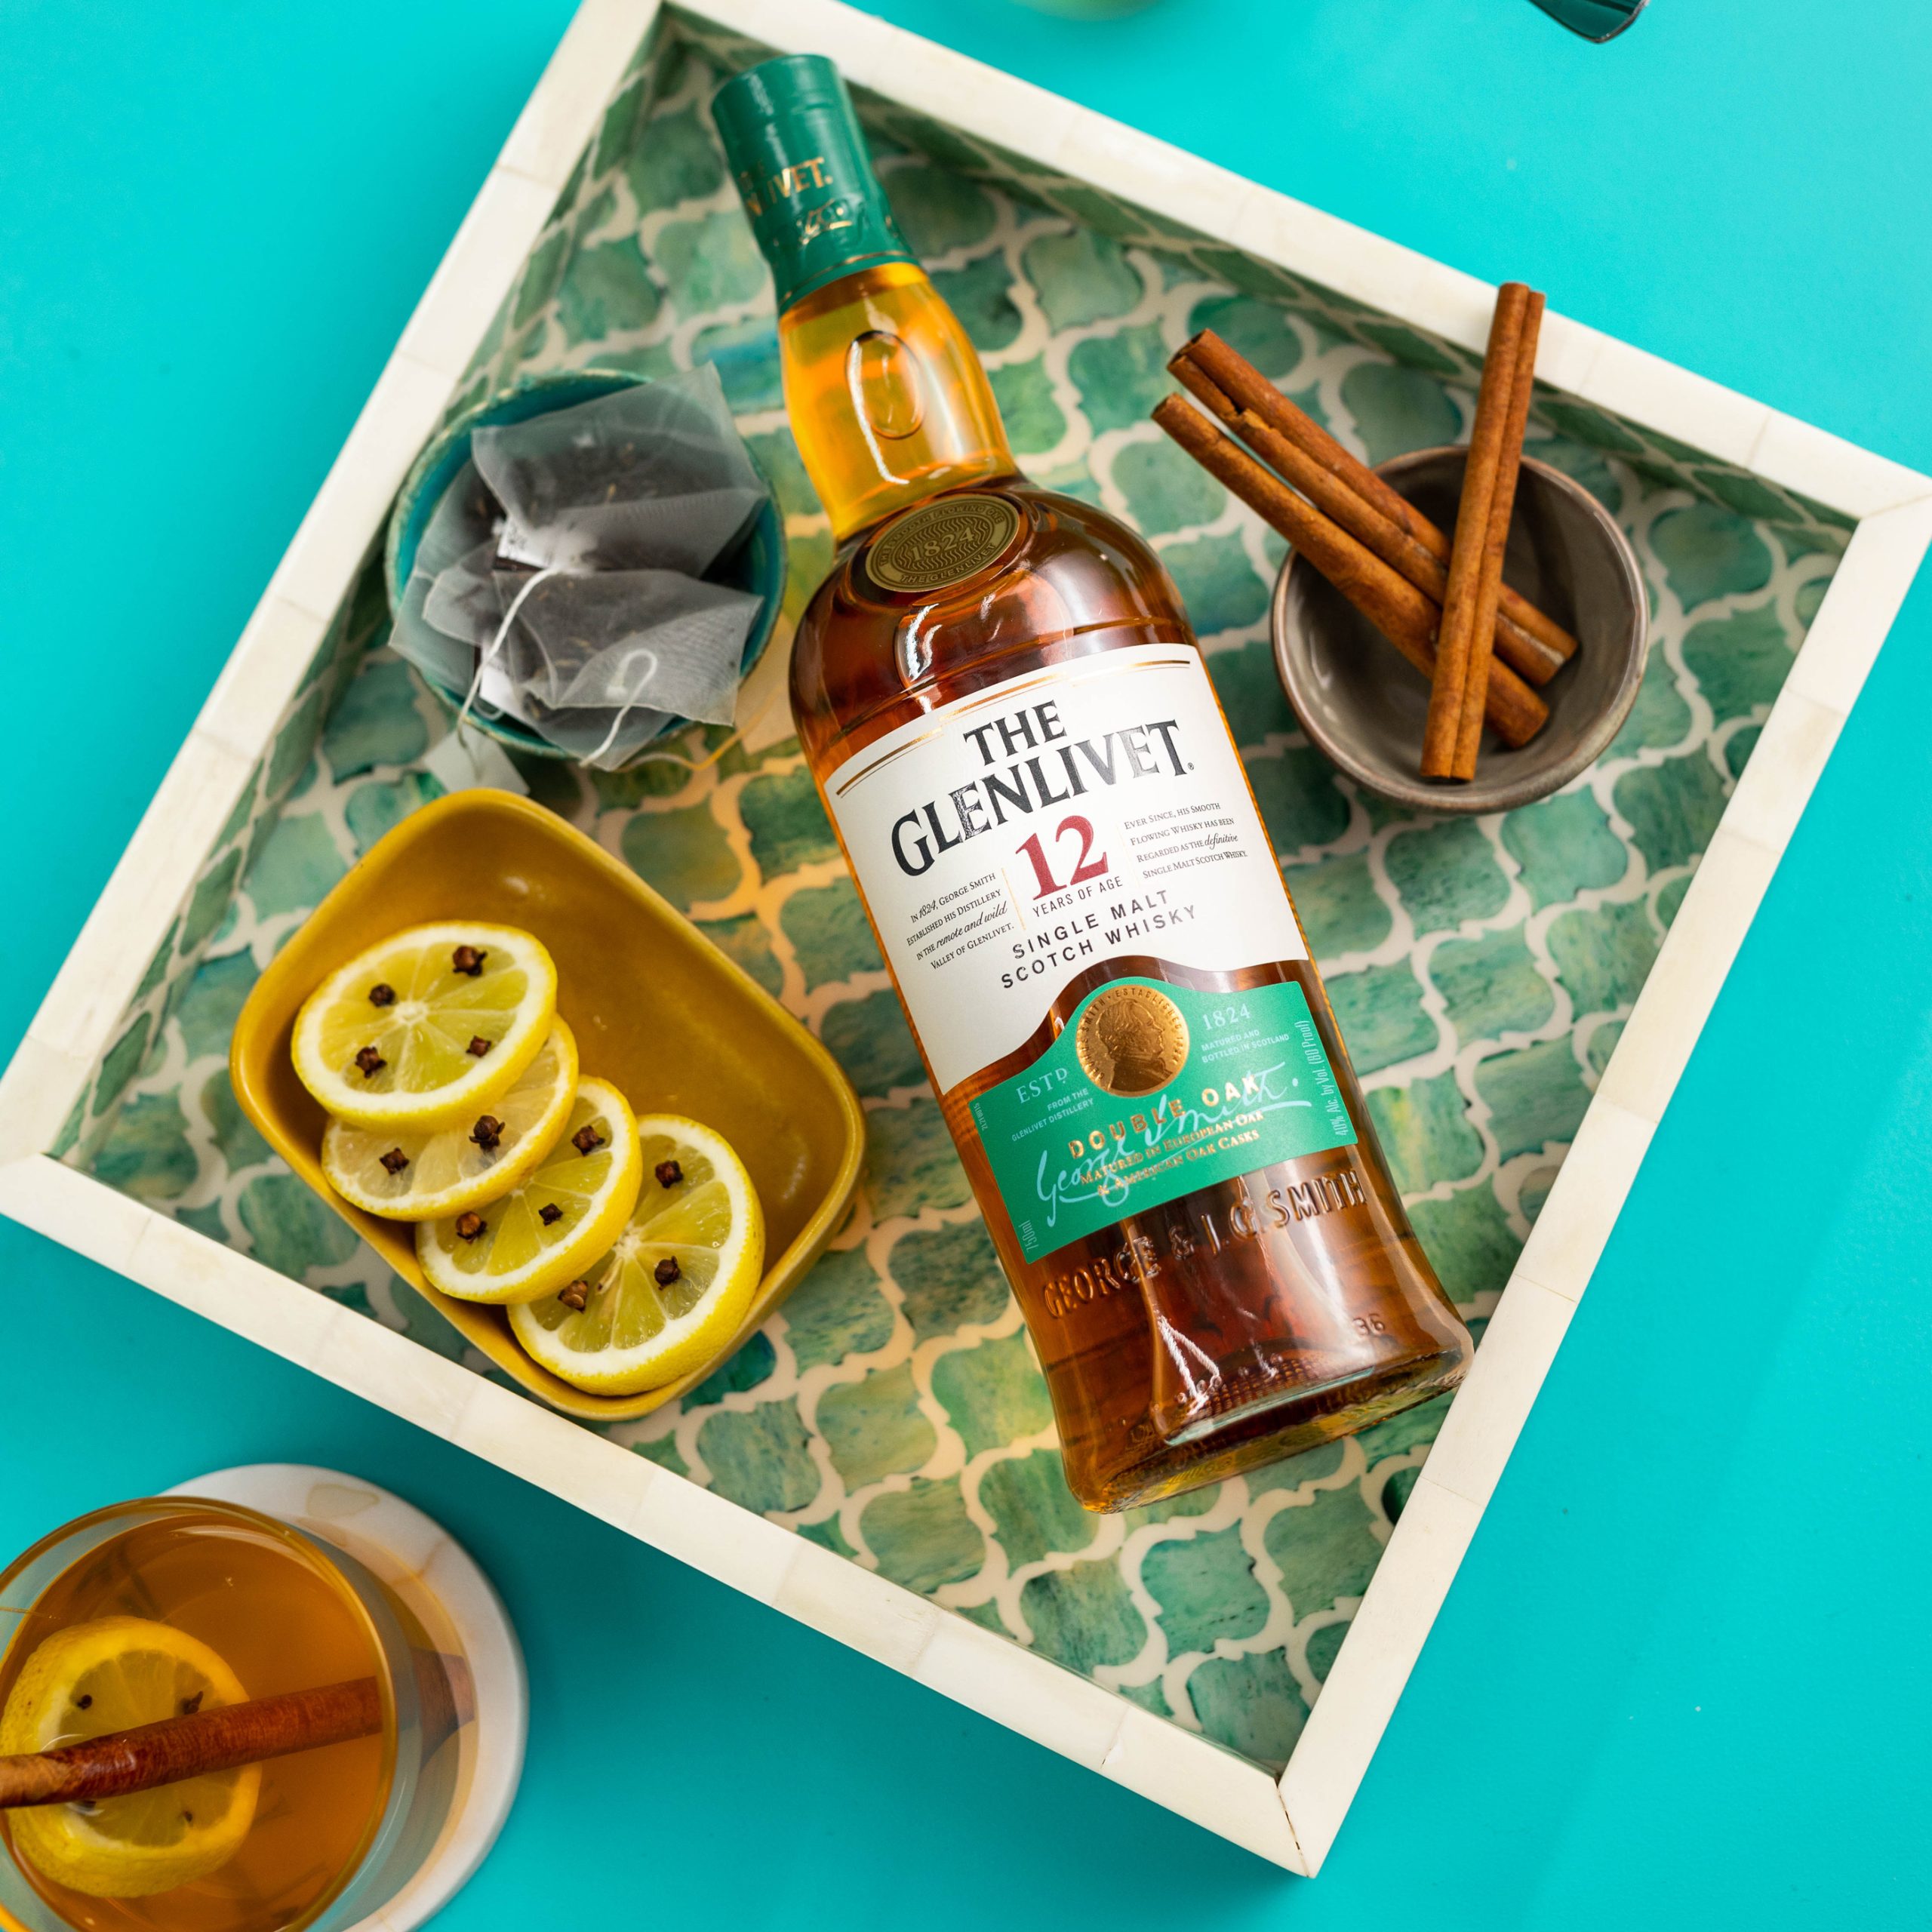 the glenlivet 12 year old hot toddy whisky cocktail